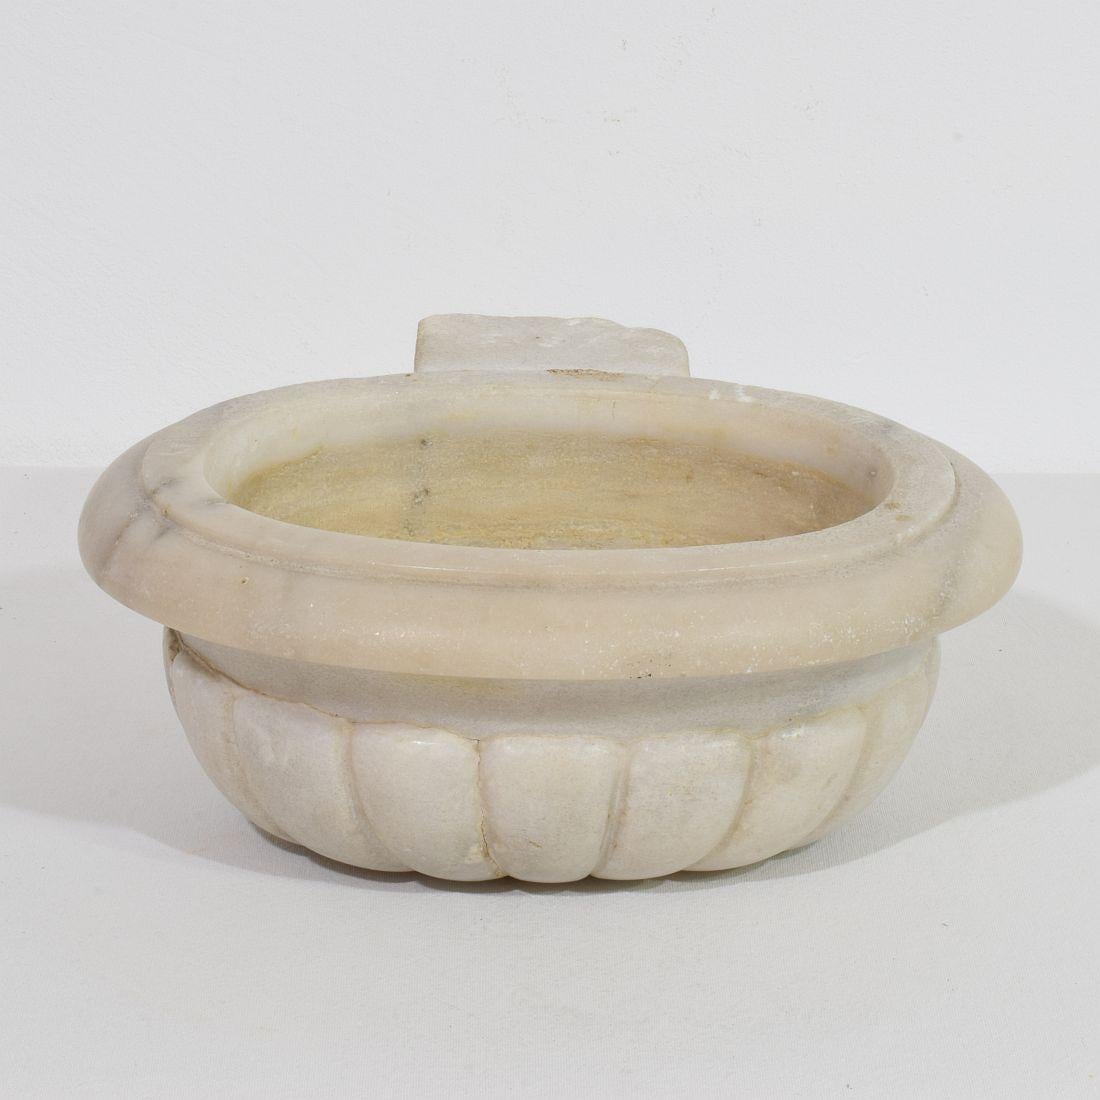 Beautiful Baroque marble holy water font or stoup,
Unique and original period piece. Italy, circa 1650-1750. Weathered condition with some minor cracks that have no influence on the stability.
Measures: H:11cm  W:28cm D:21-26,5cm 